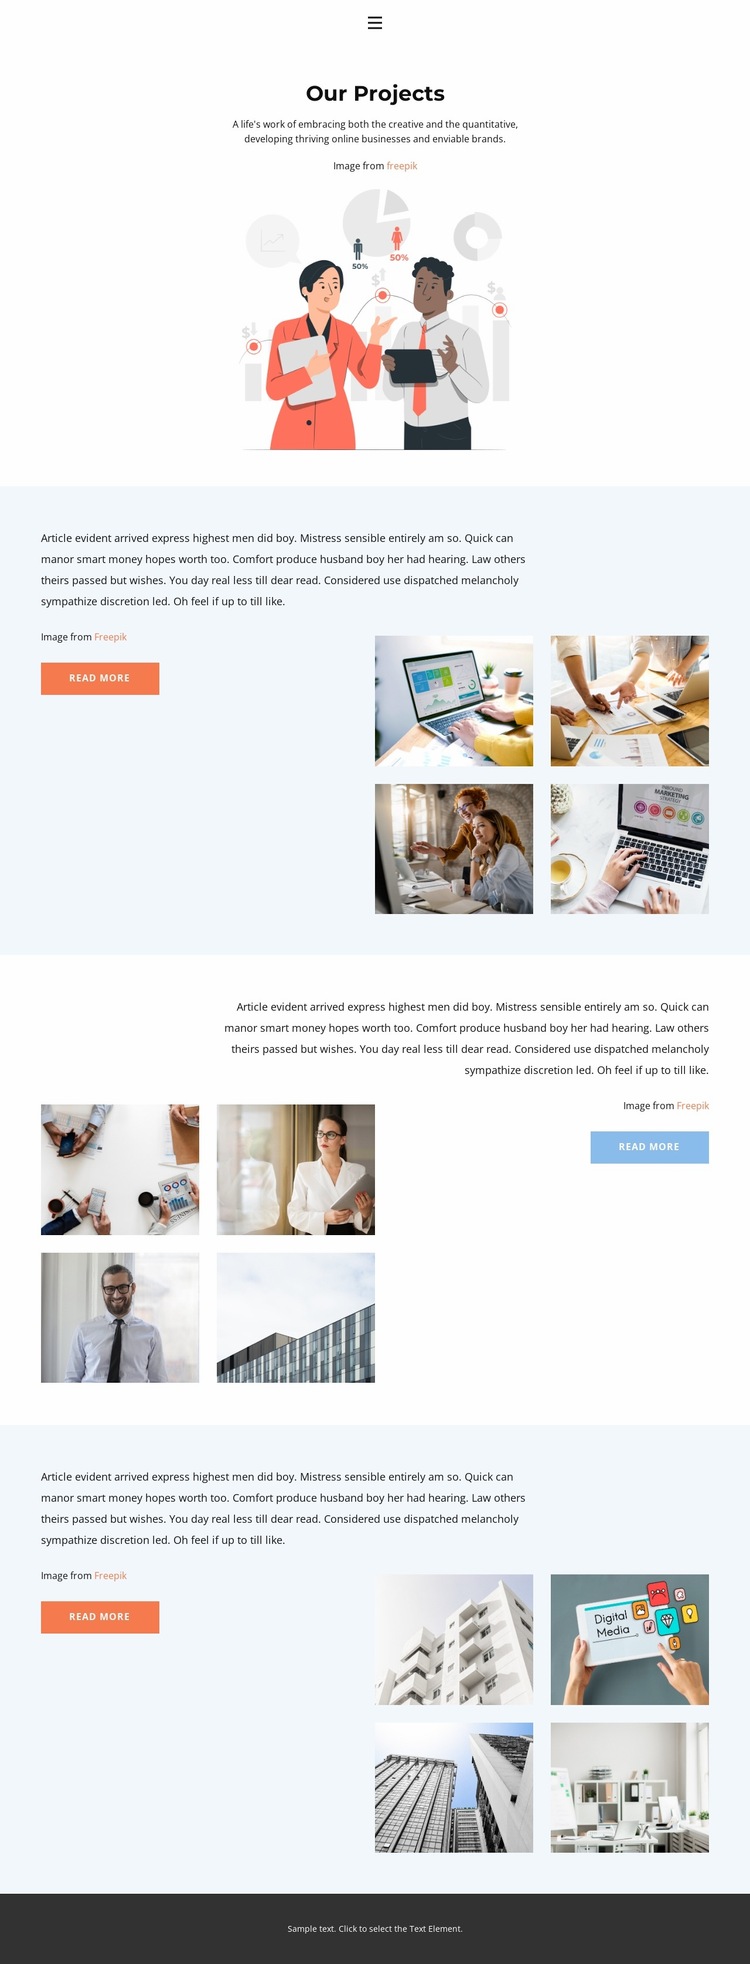 More about our projects Website Builder Templates